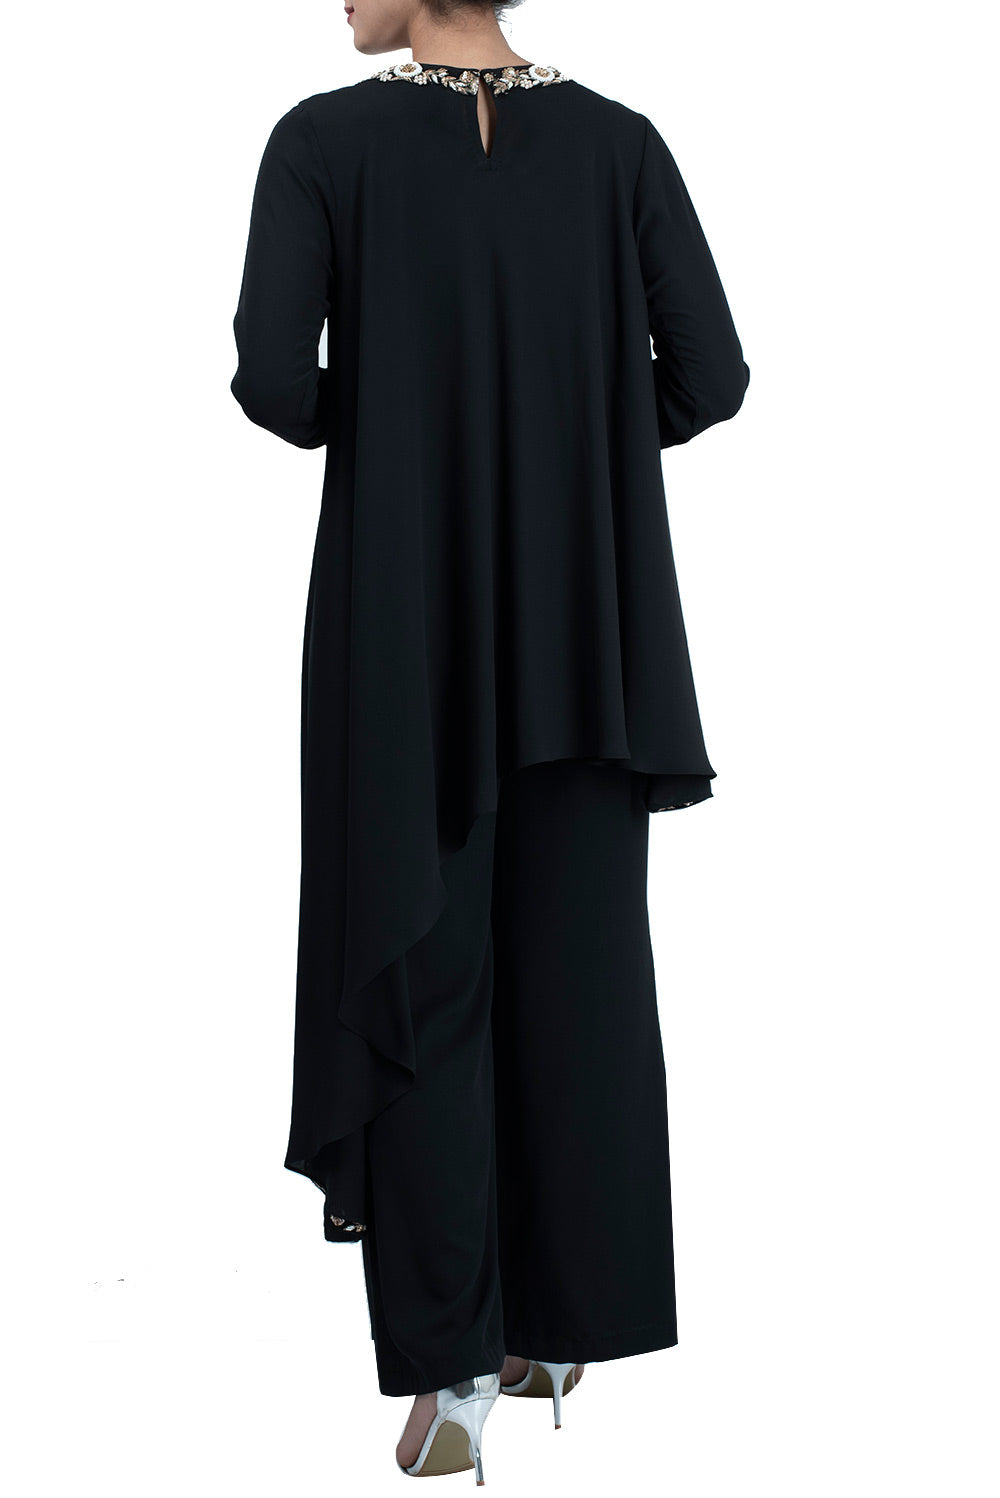 Black Tunic with Pants - kylee